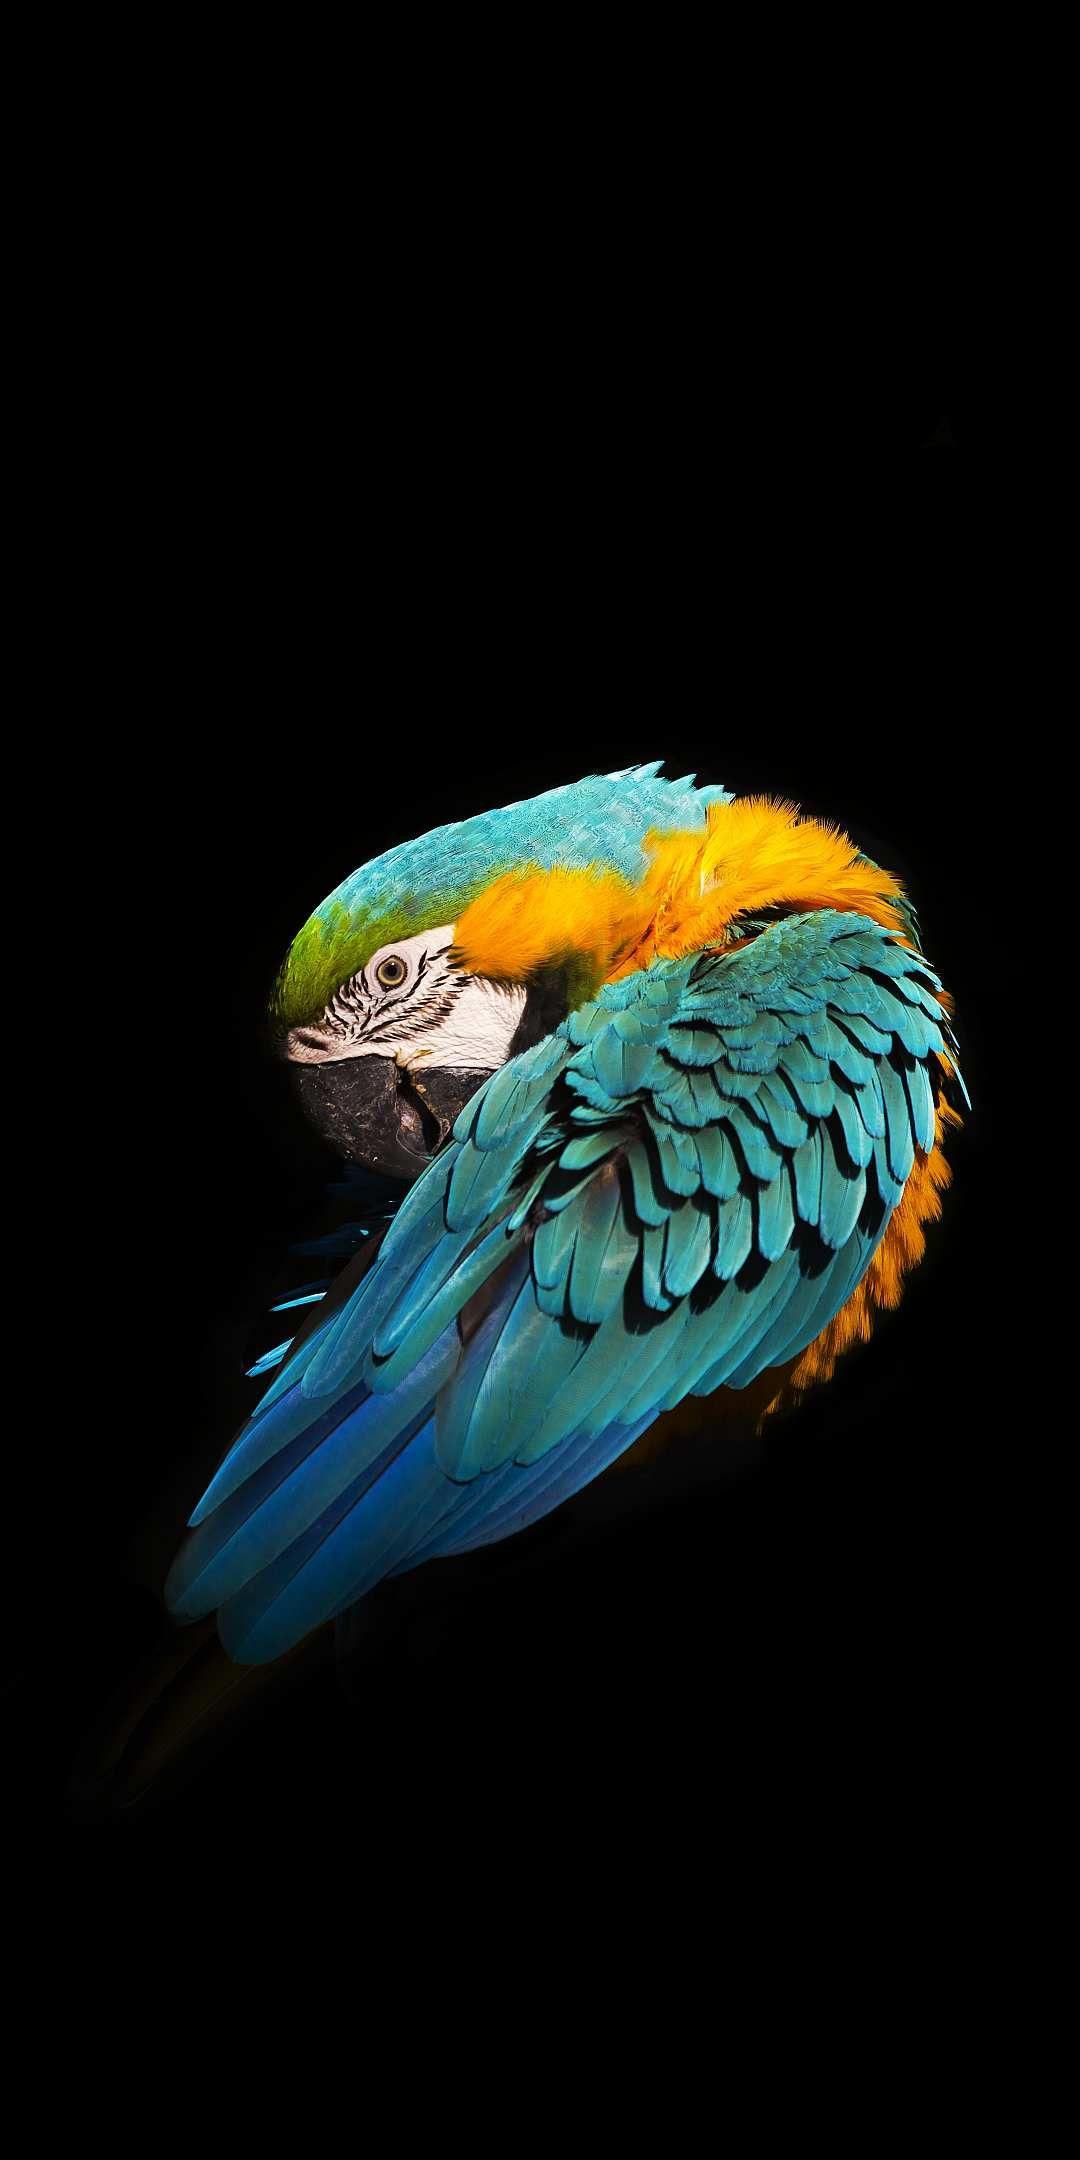 Minimal Blue and yellow macaw iPhone Wallpaper. Bird wallpaper, Animal wallpaper, Parrot wallpaper